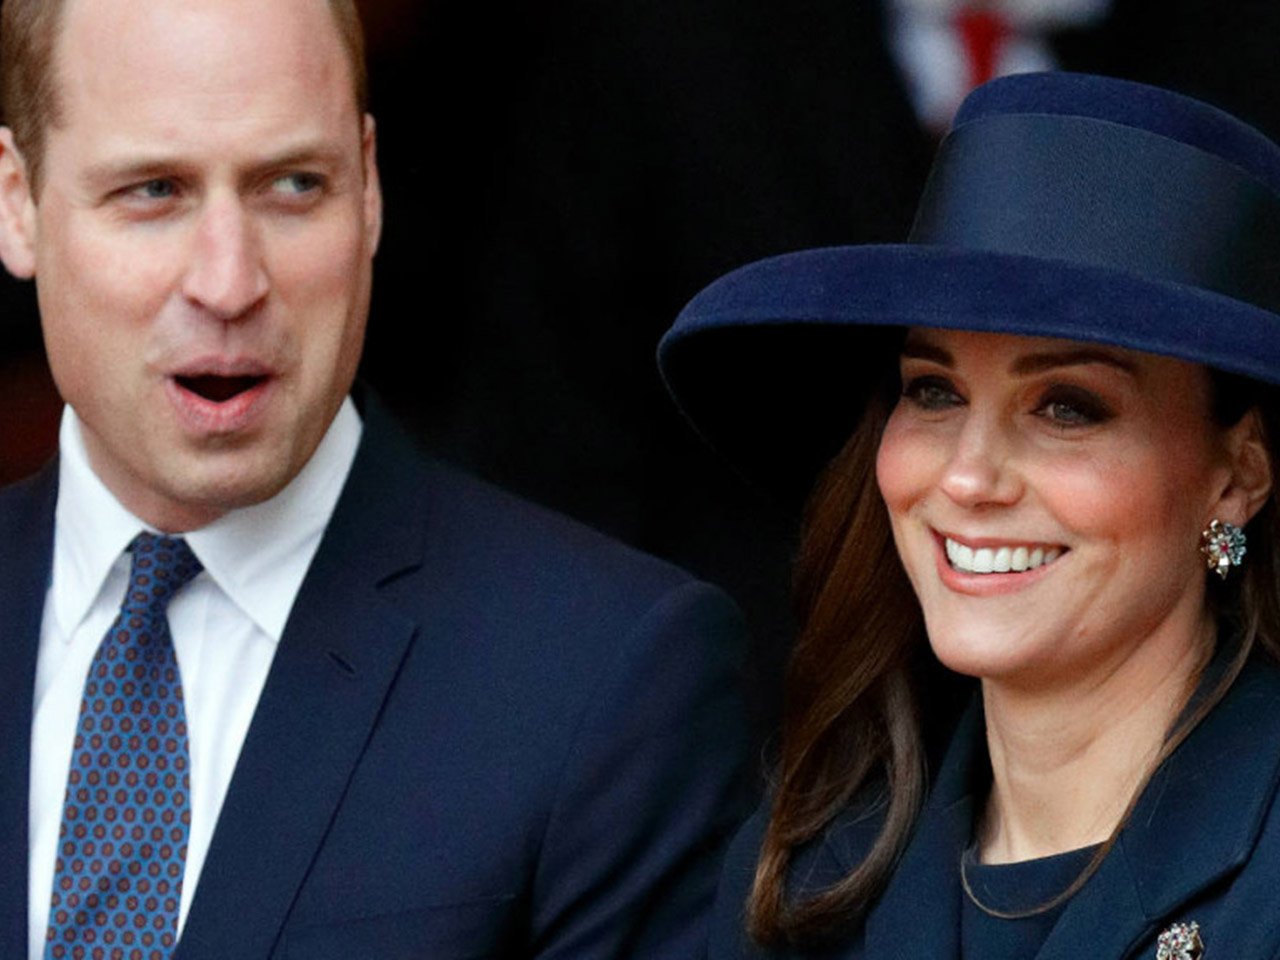 photo of prince william and duchess kate for article on whether william accidentally revealed the royal baby gender